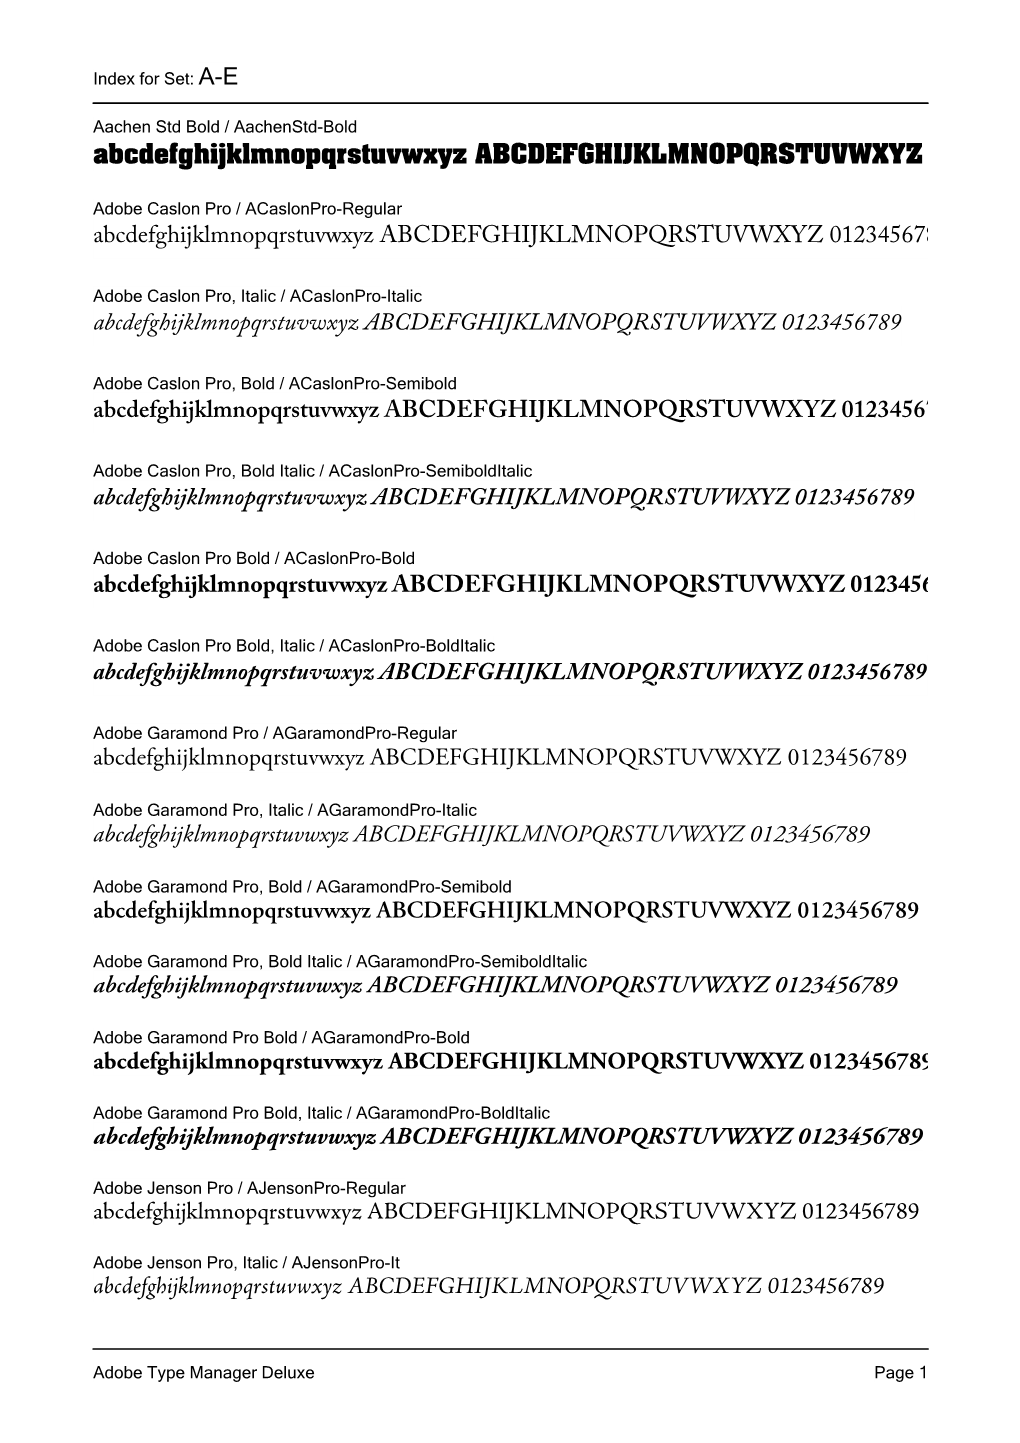 Adobe Type Manager Deluxe Page 1 Index for Set: A-E